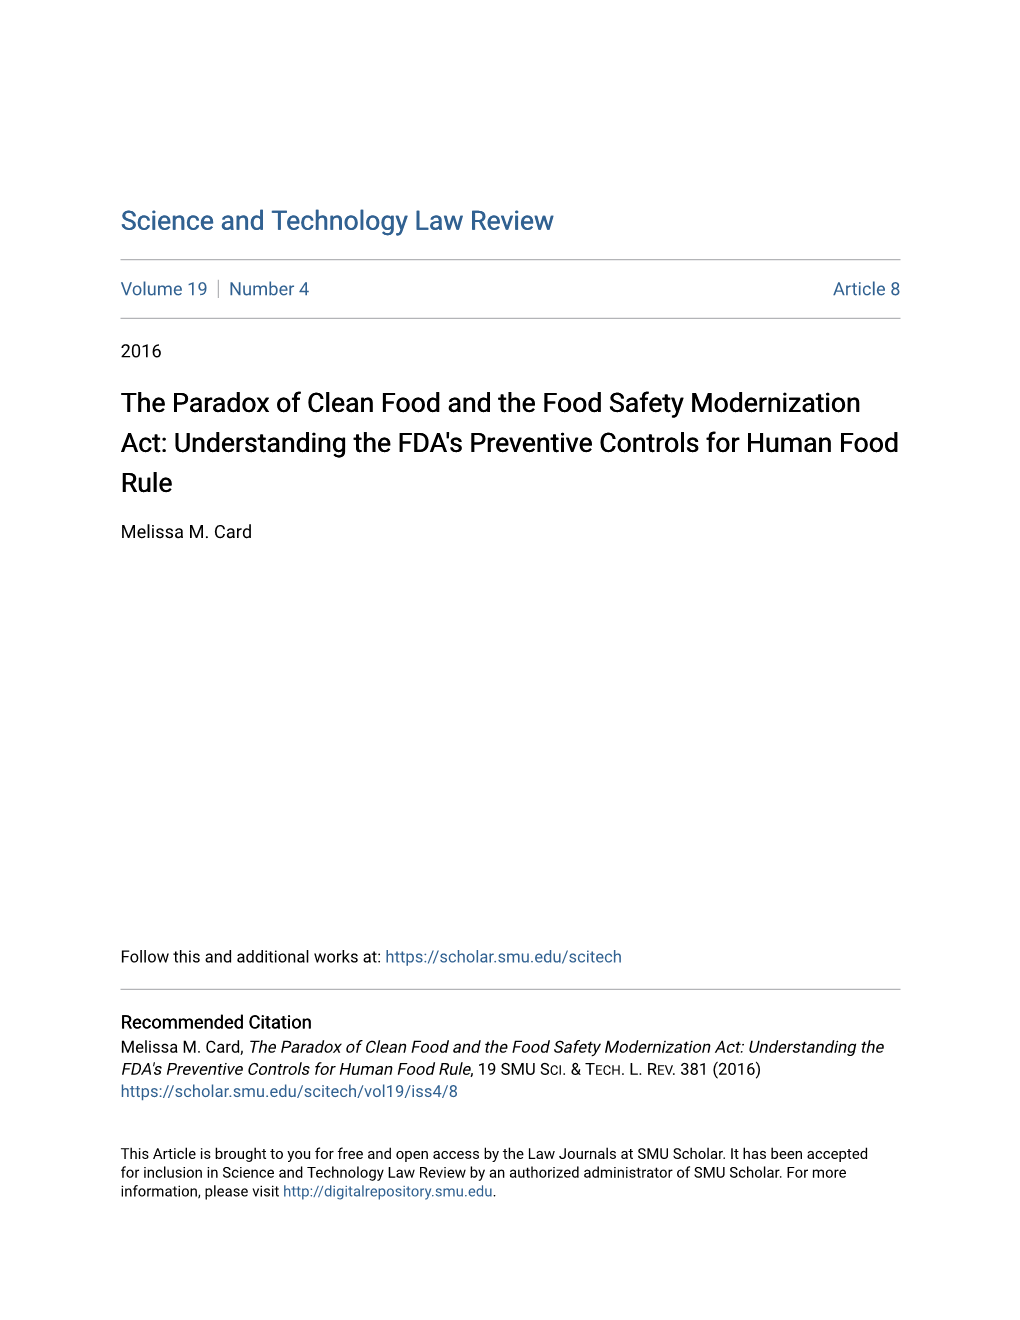 The Paradox of Clean Food and the Food Safety Modernization Act: Understanding the FDA's Preventive Controls for Human Food Rule